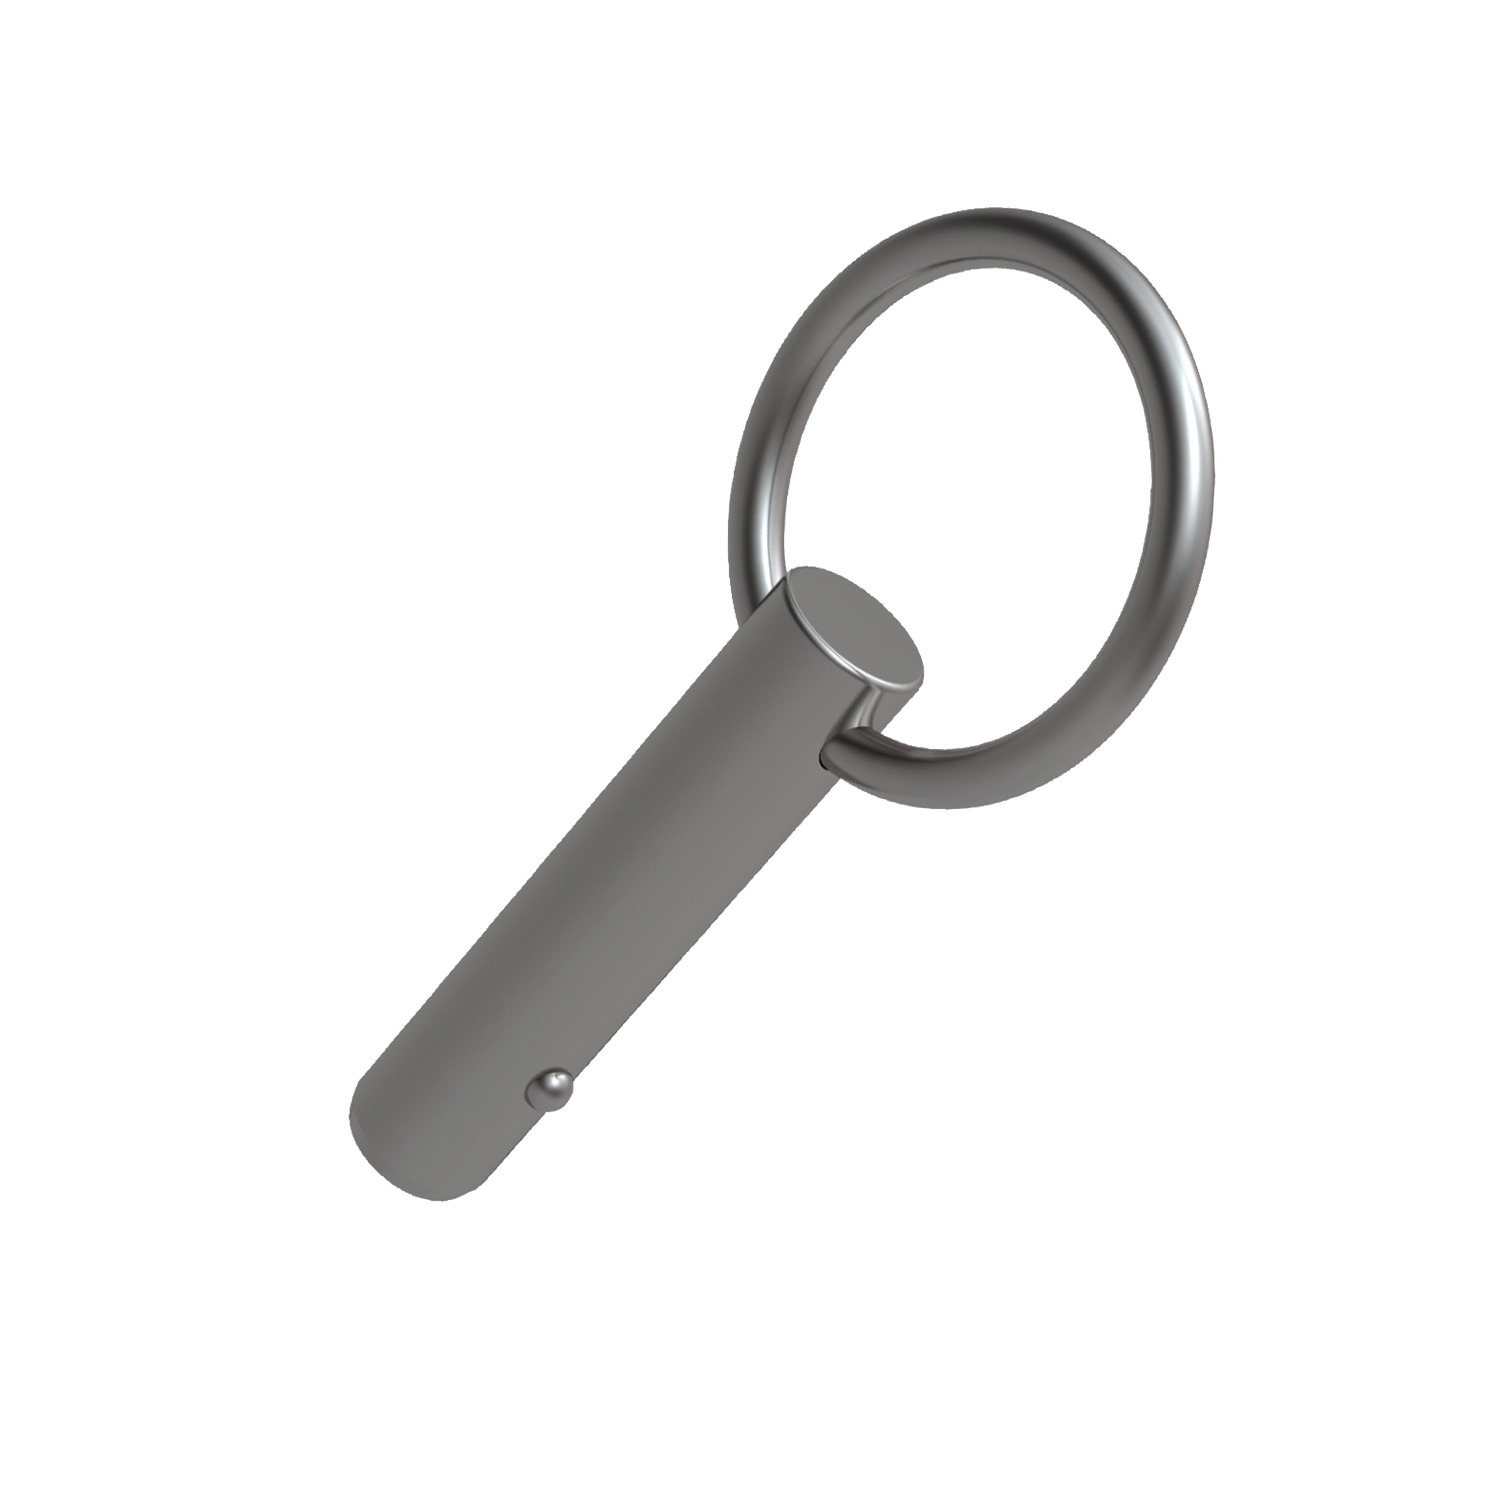 Detent Pin Shoulderless detent pins with ring handle, made from stainless steel. Solid body with direct spring loaded ball ensure reliable operation.